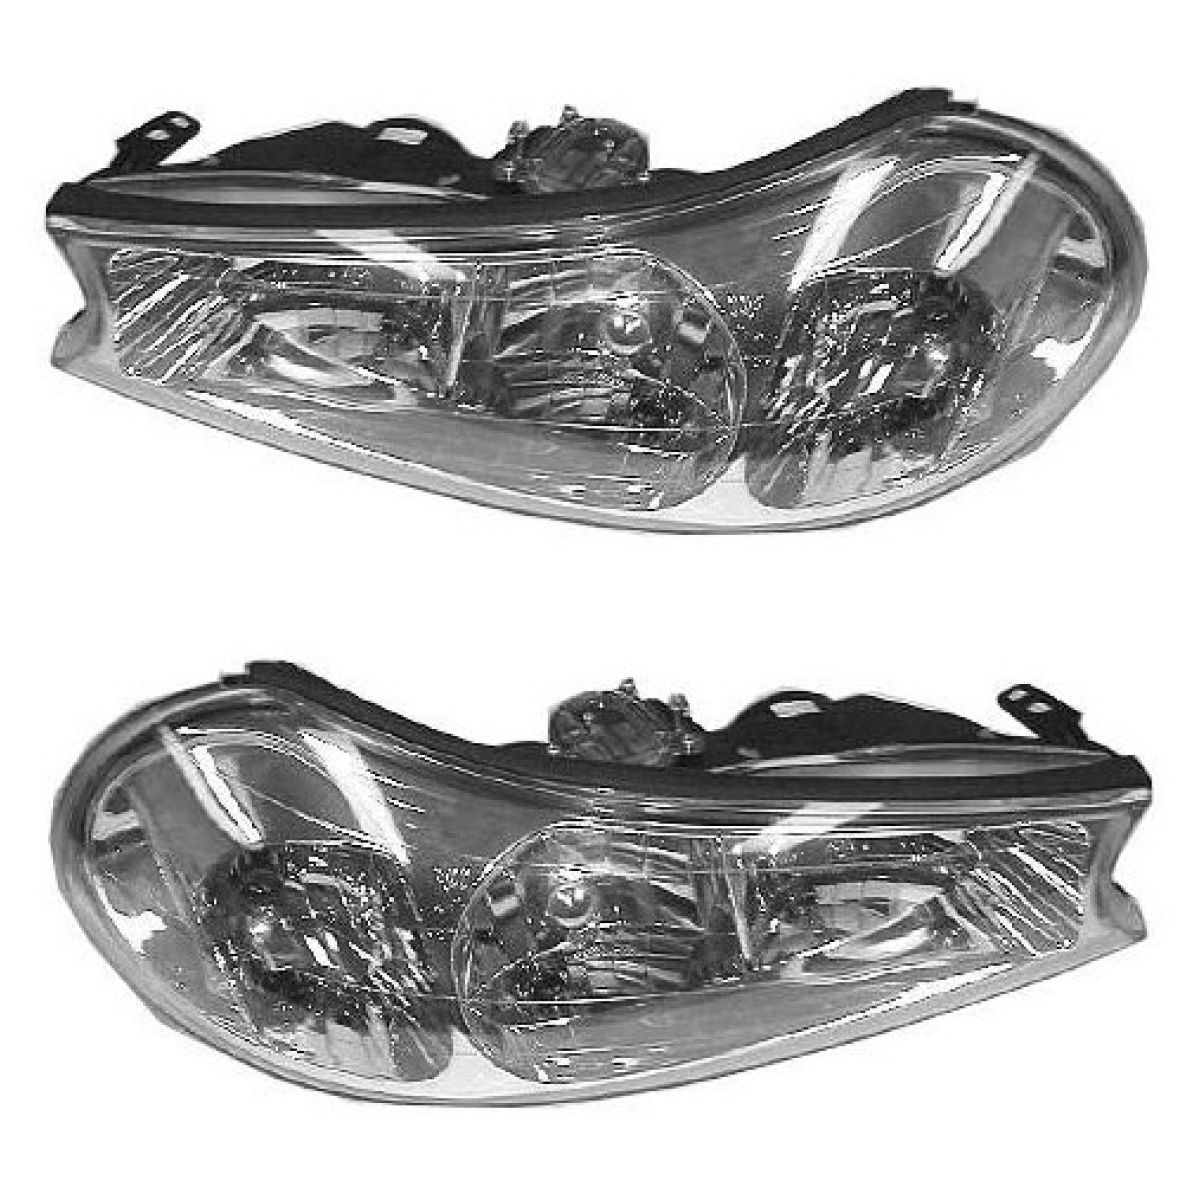 Ford contour aftermarket headlights #5